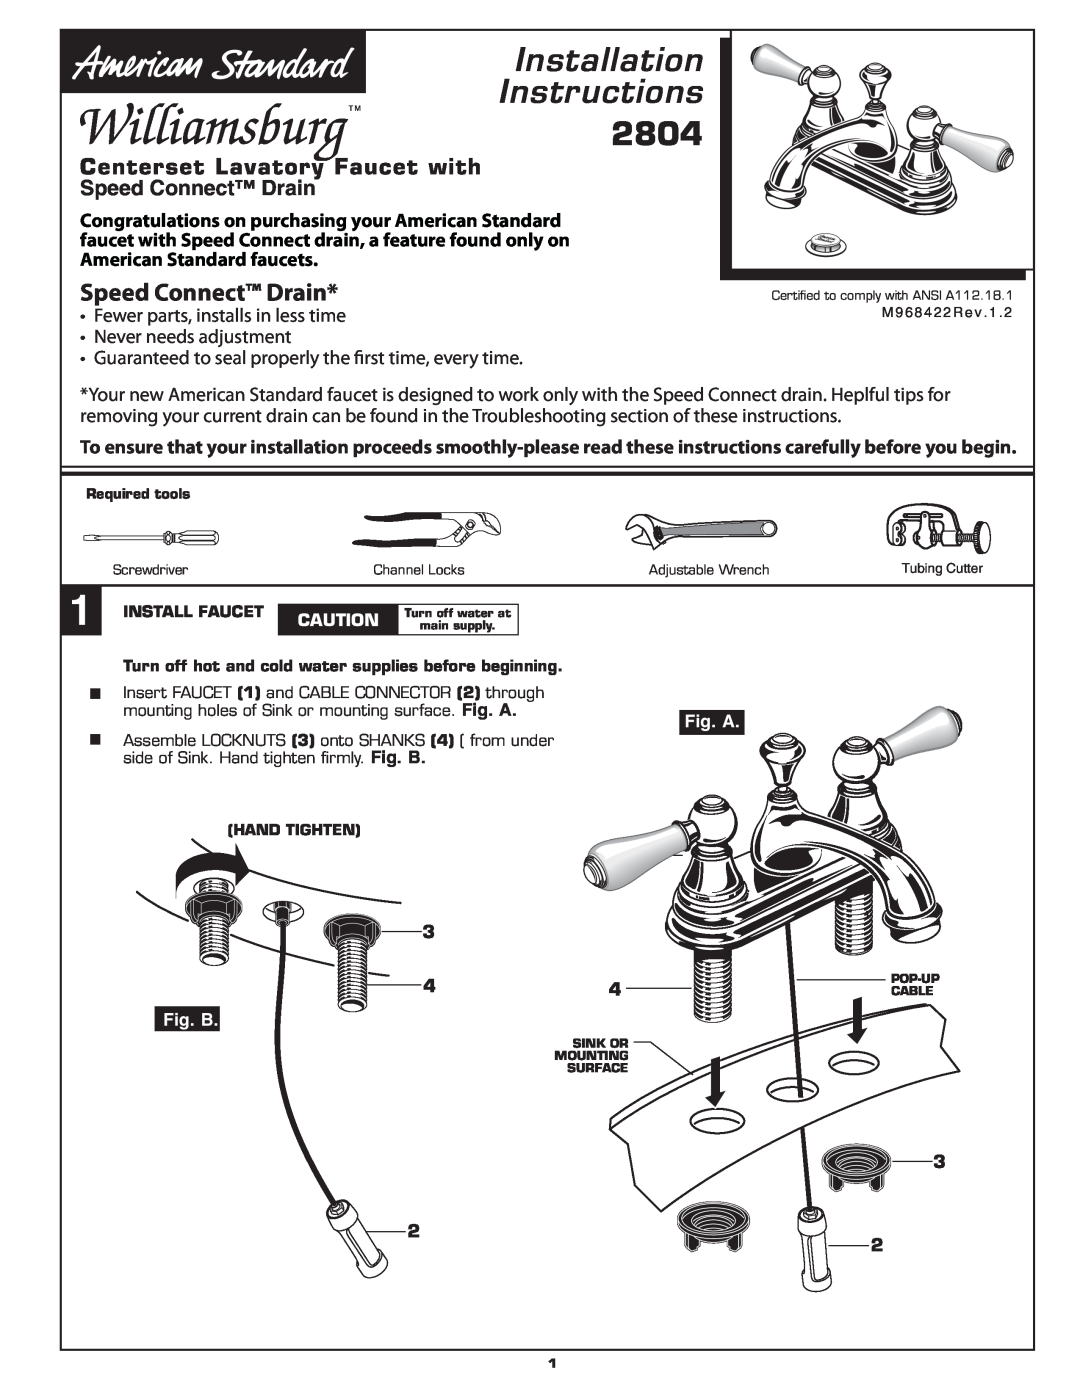 American Standard 2804 installation instructions Install Faucet, Turn off hot and cold water supplies before beginning 